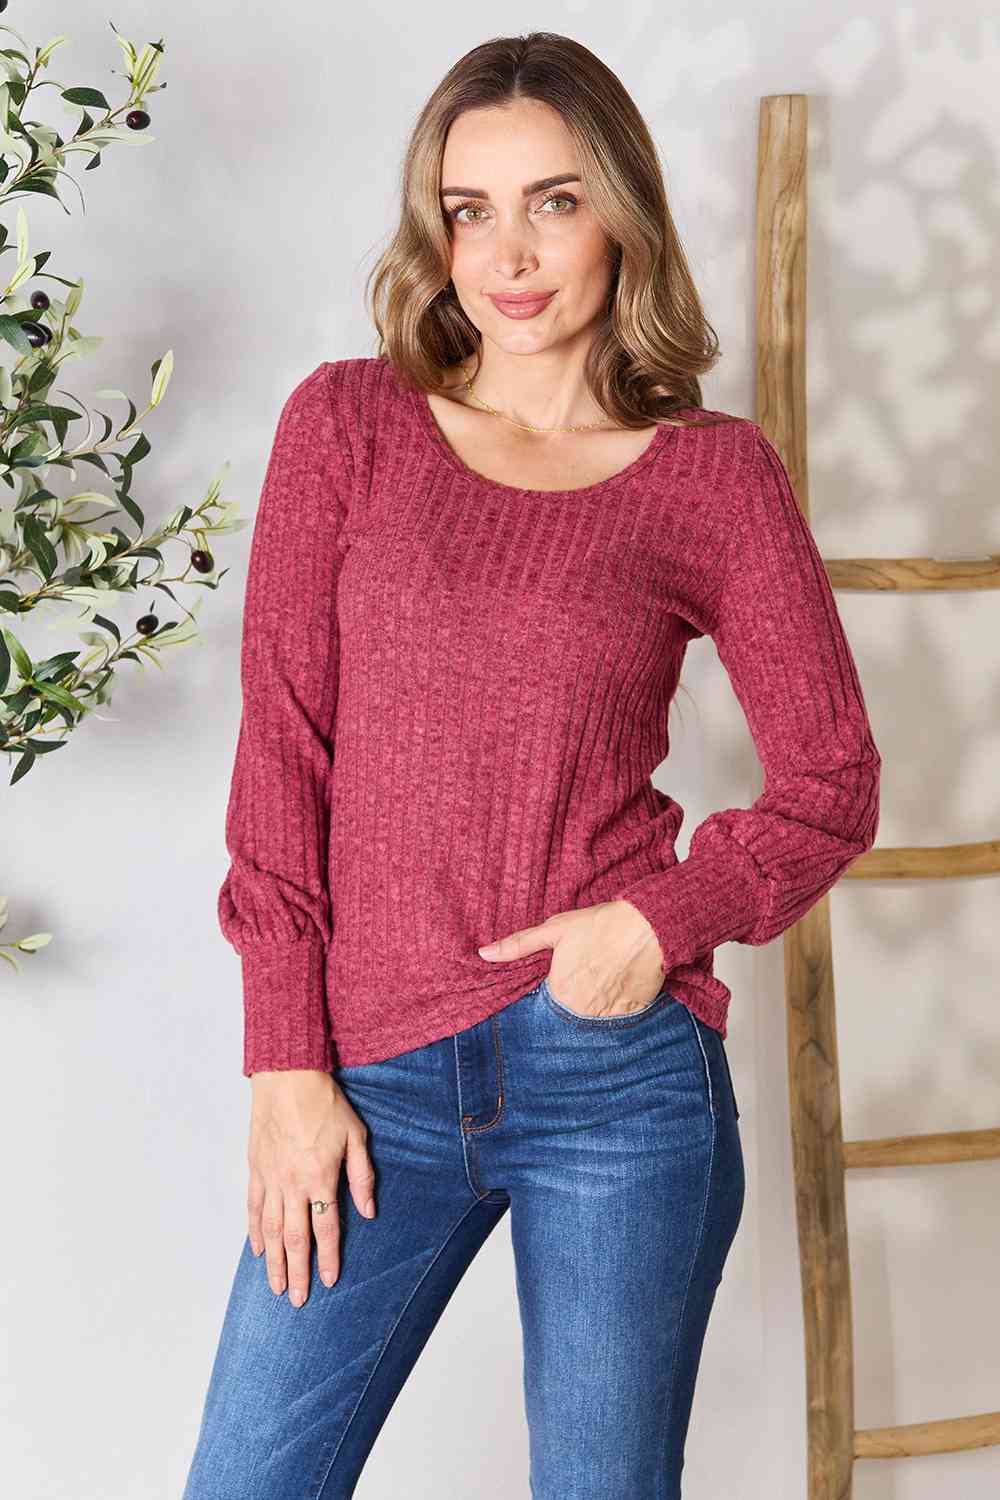 Ribbed Round Neck Lantern Sleeve Blouse - Wine / S - Women’s Clothing & Accessories - Shirts & Tops - 1 - 2024